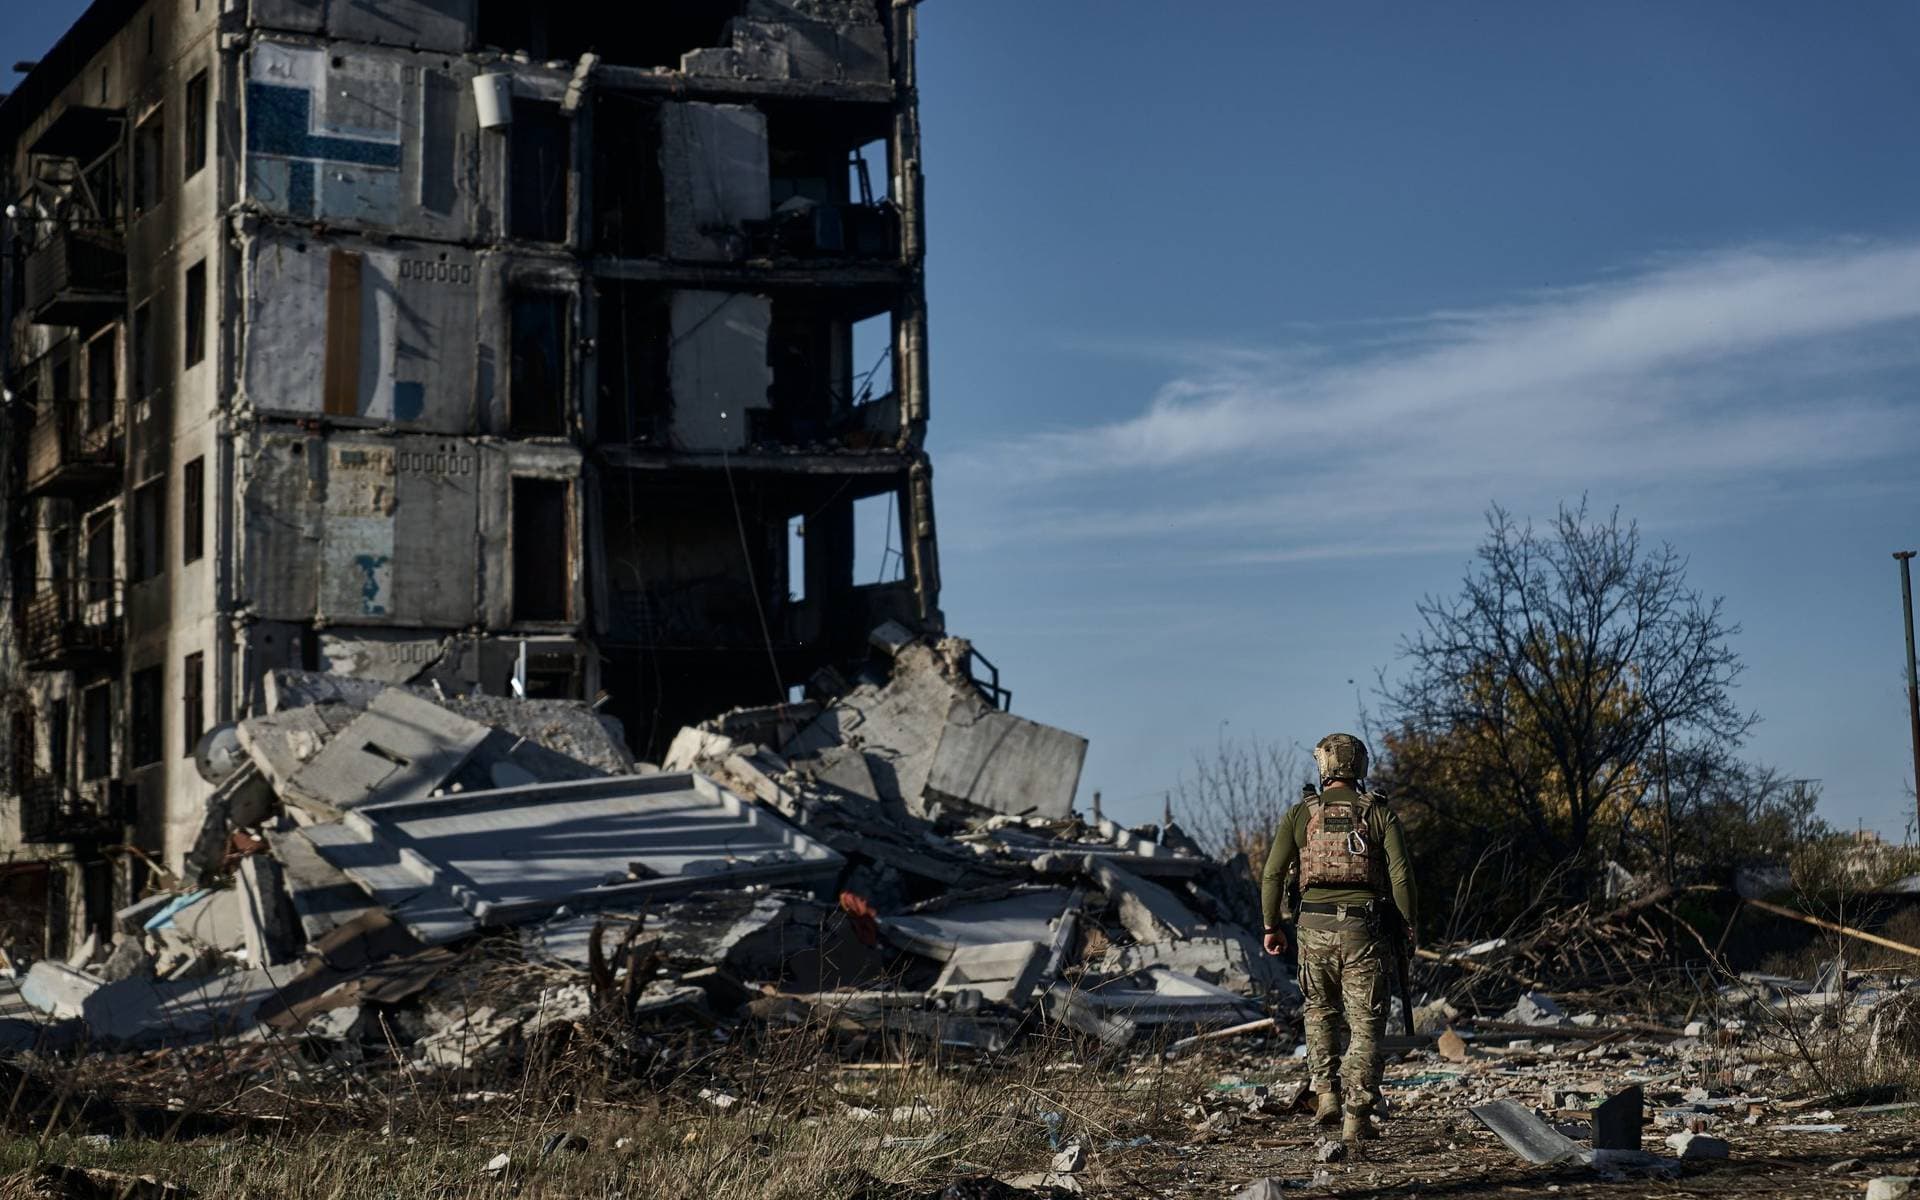 A Ukrainain soldier walks through the rubble of a destroyed building in the front line city of Avdiivka